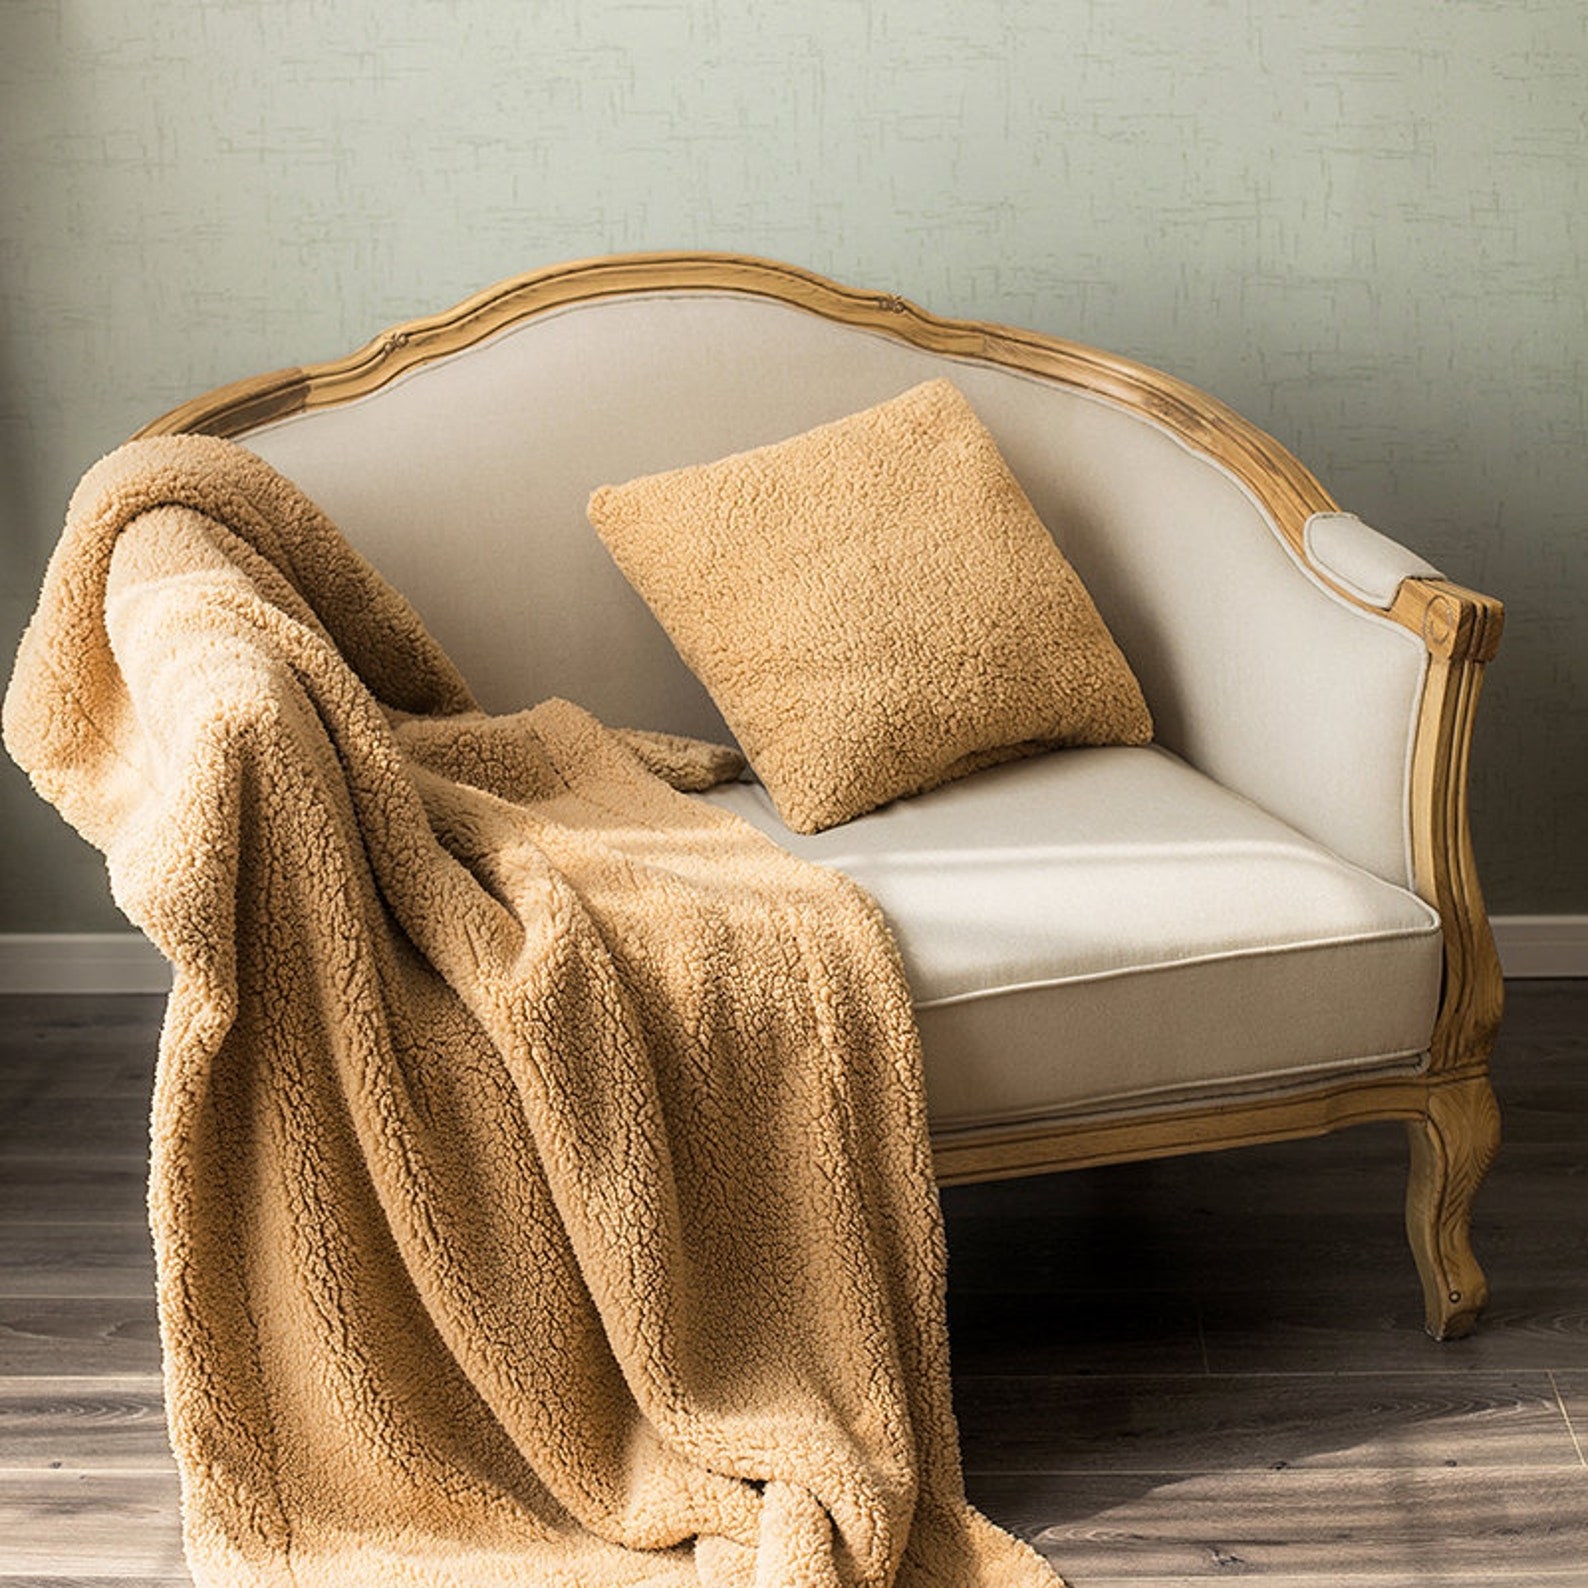 A mustard yellow blanket and pillow on a chair